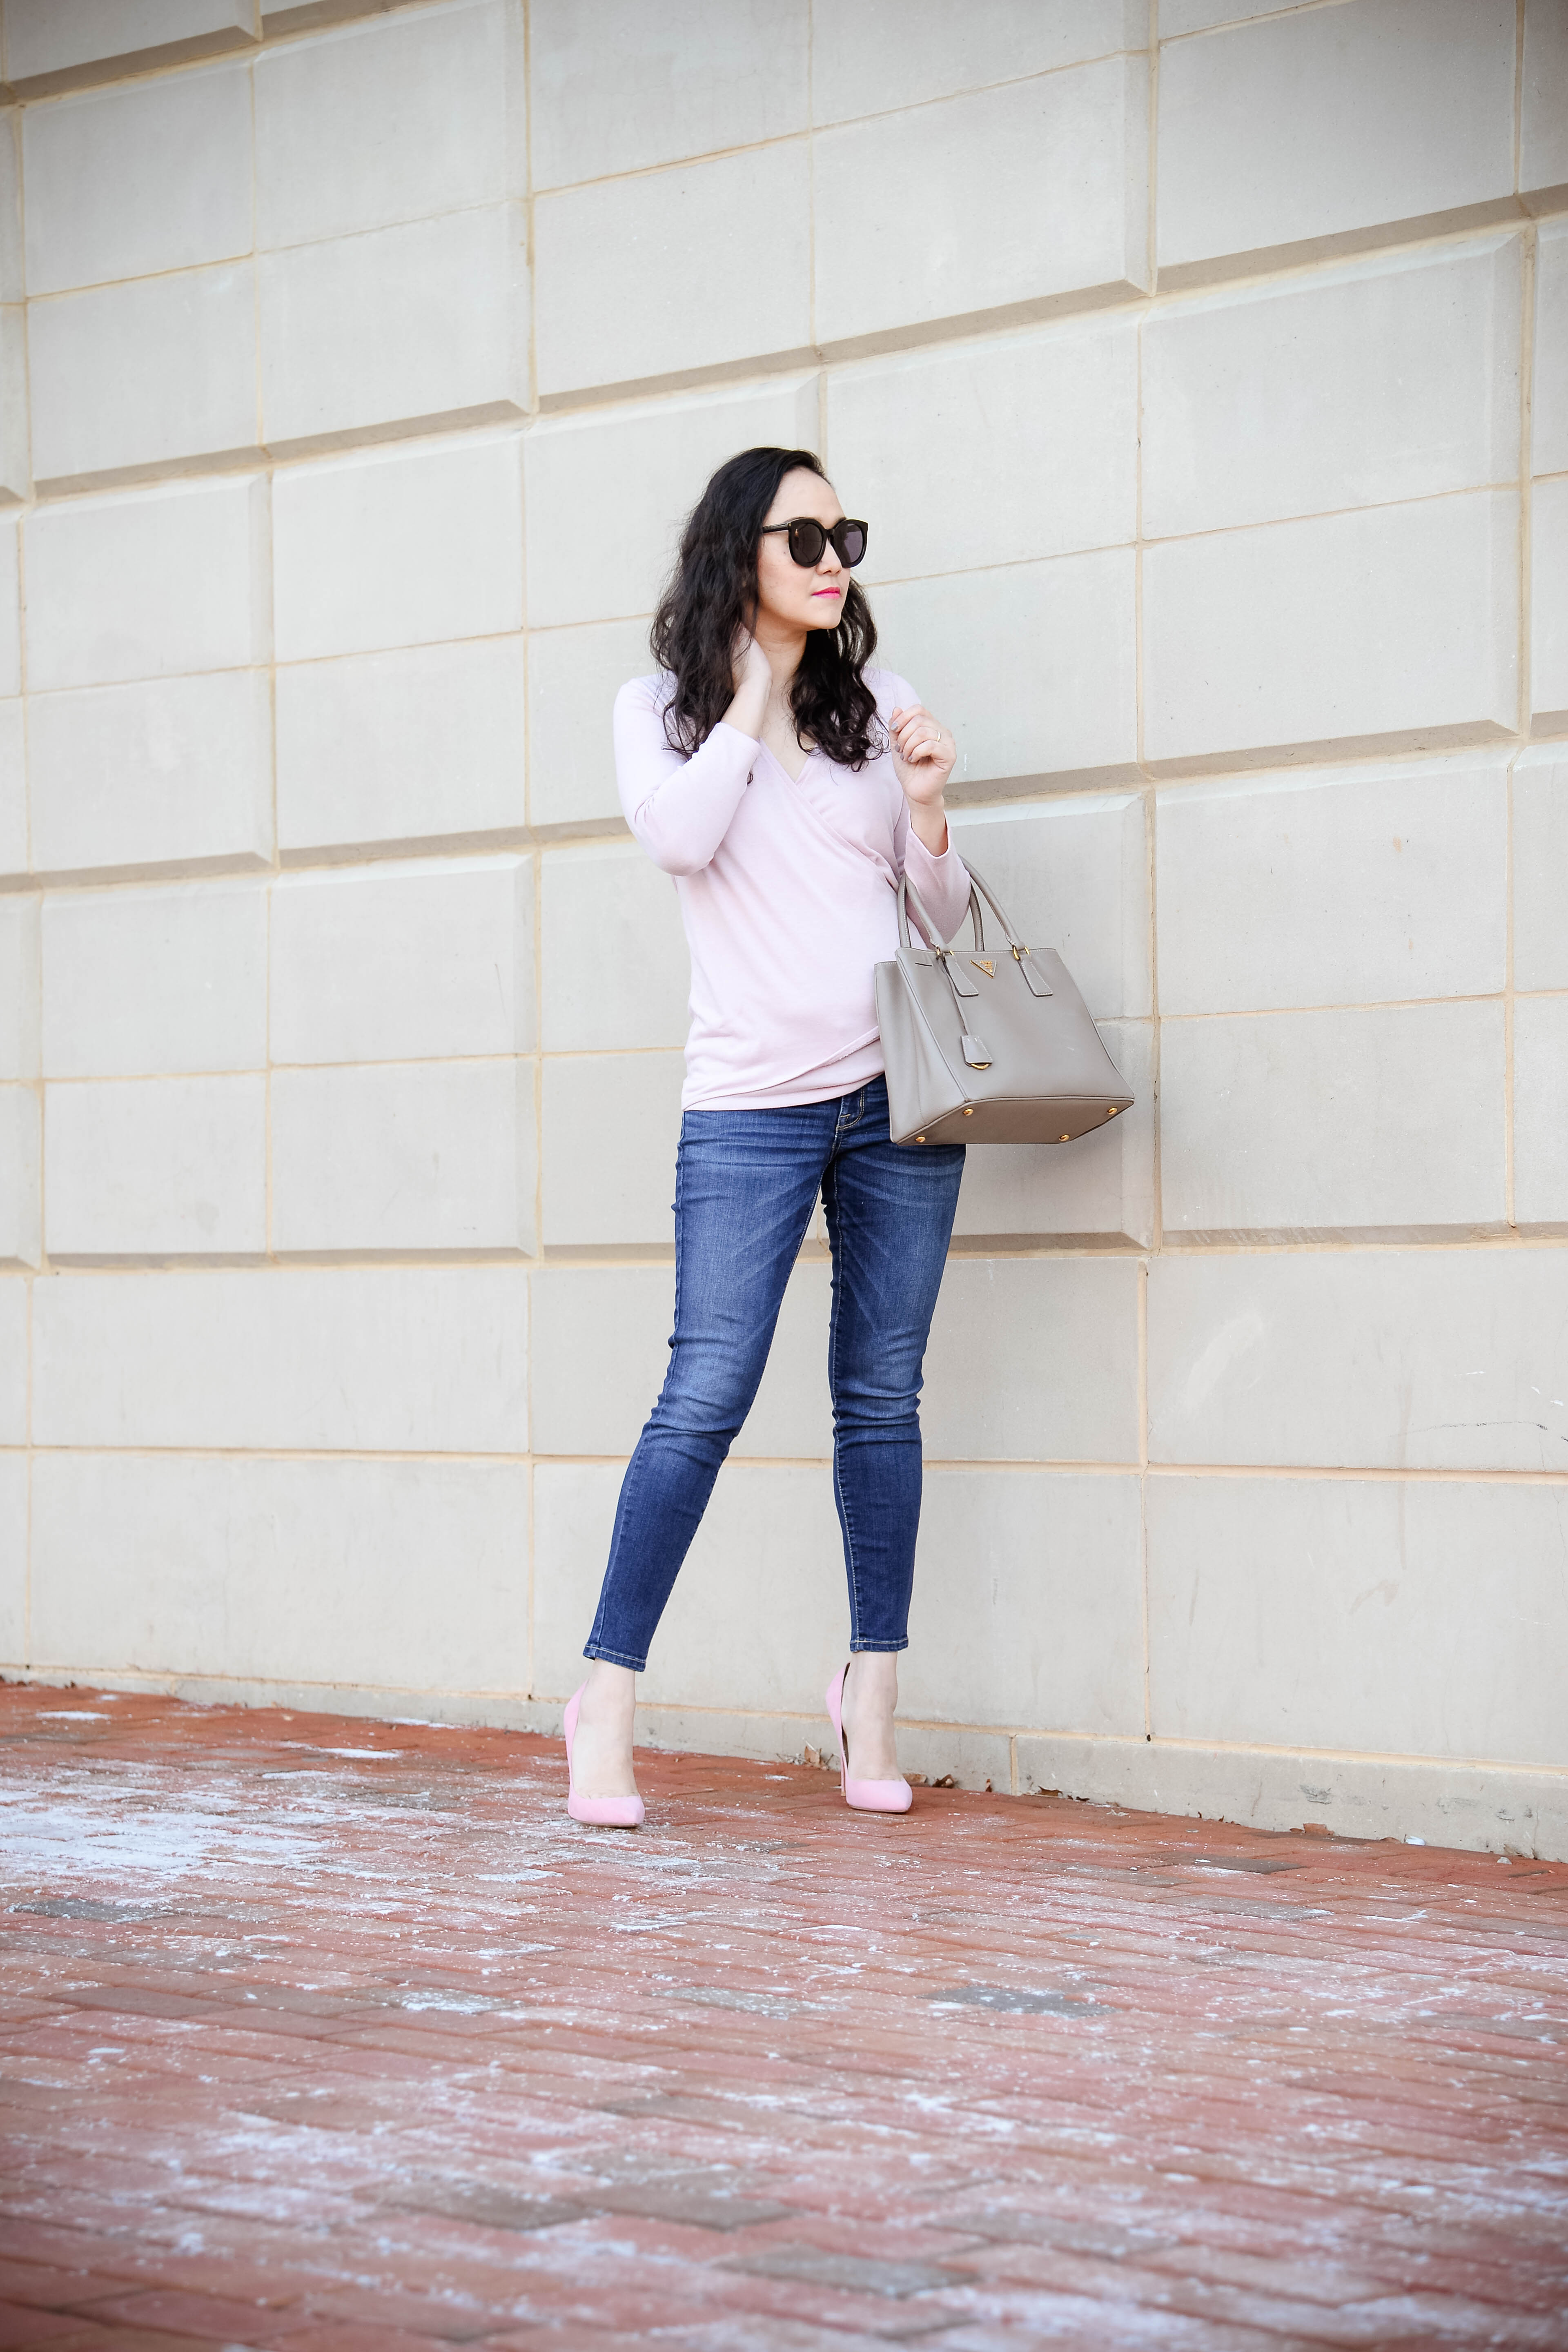 Blushing for Spring with a Wrap Top 